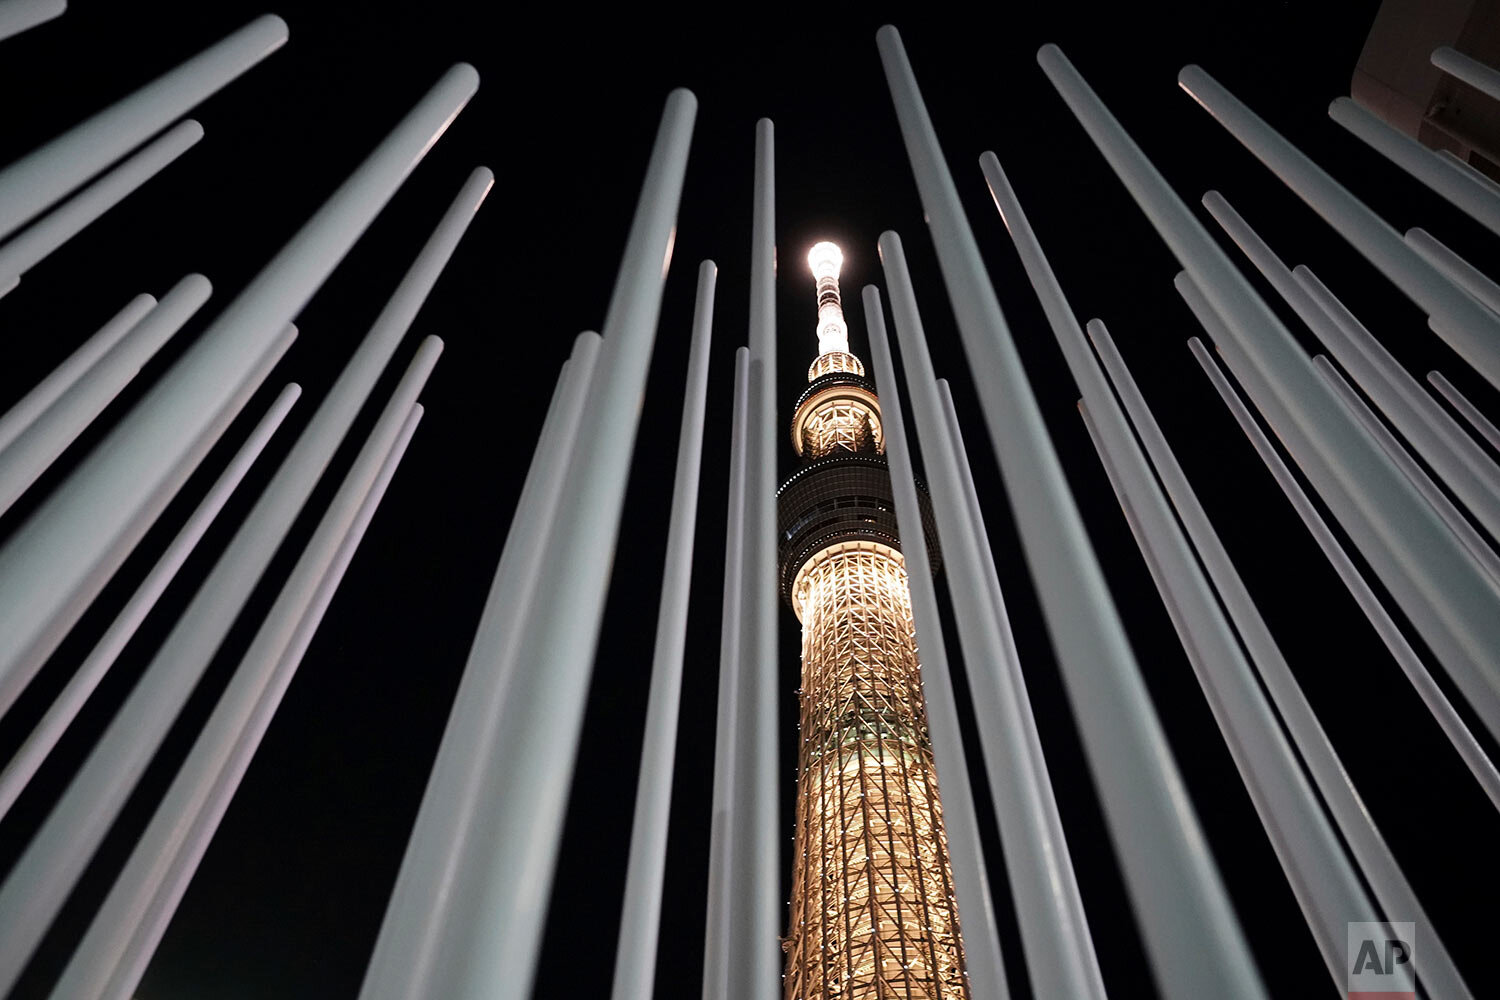  The Tokyo Skytree, the tallest tower in Japan, is illuminated with the color of the Olympic Torch, to commemorate 100 days until the torch relay begins, Tuesday, Dec. 15, 2020, in Tokyo. (AP Photo/Eugene Hoshiko) 